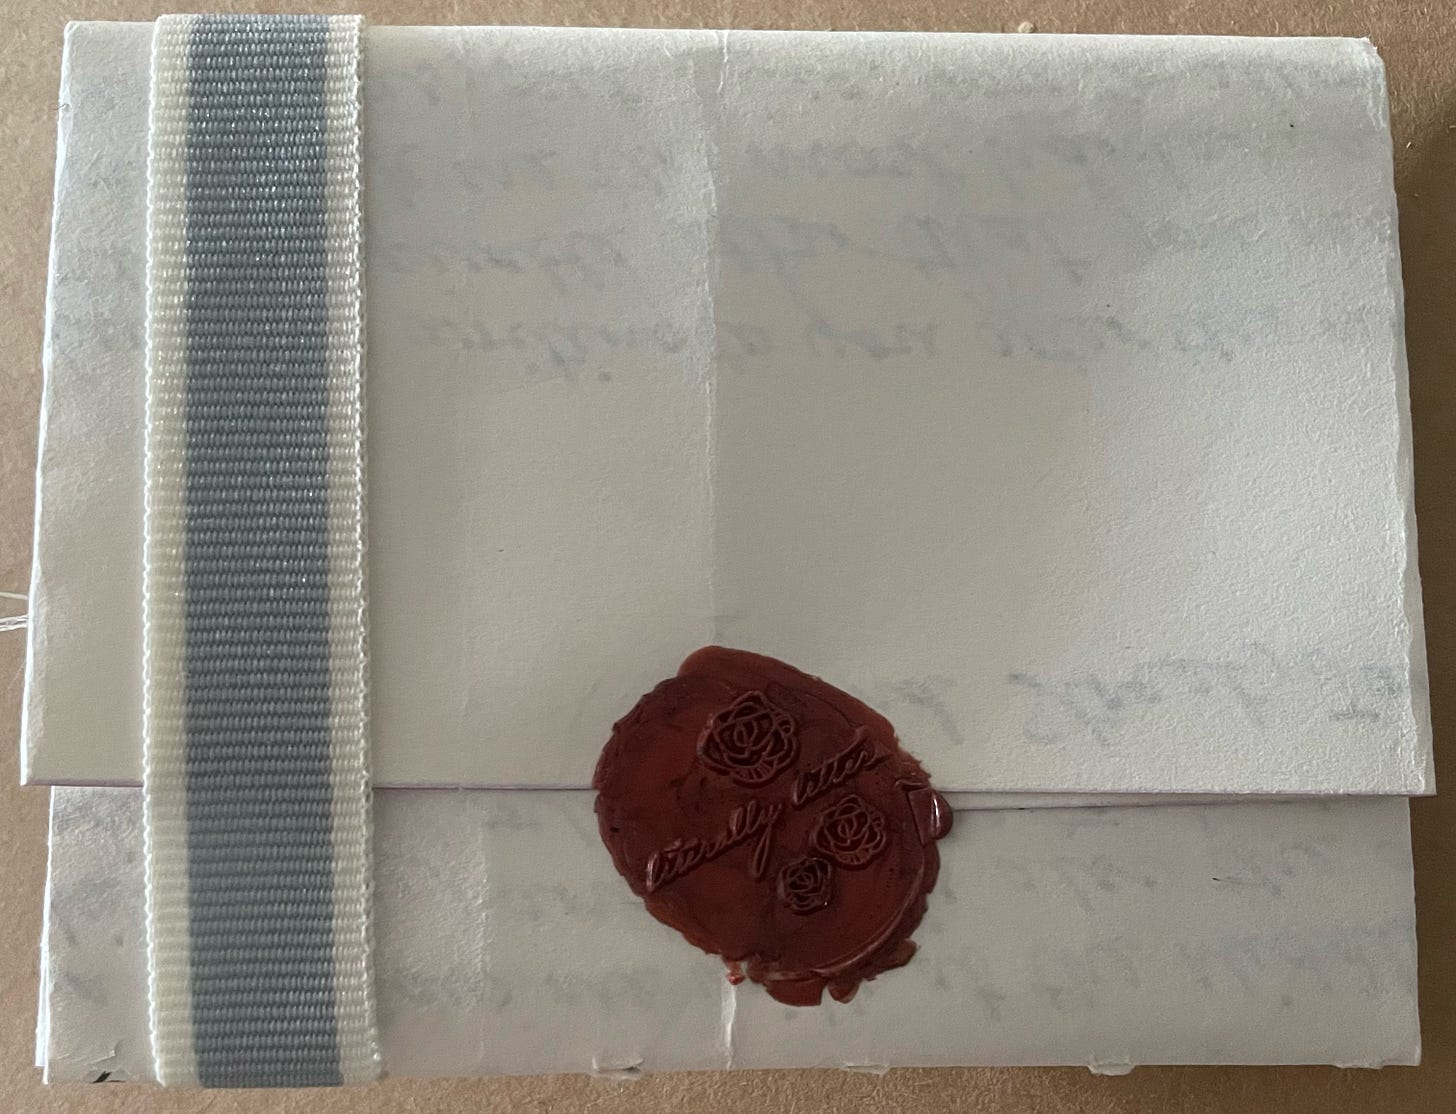 Unopened letter turned over to see its seal on the back.